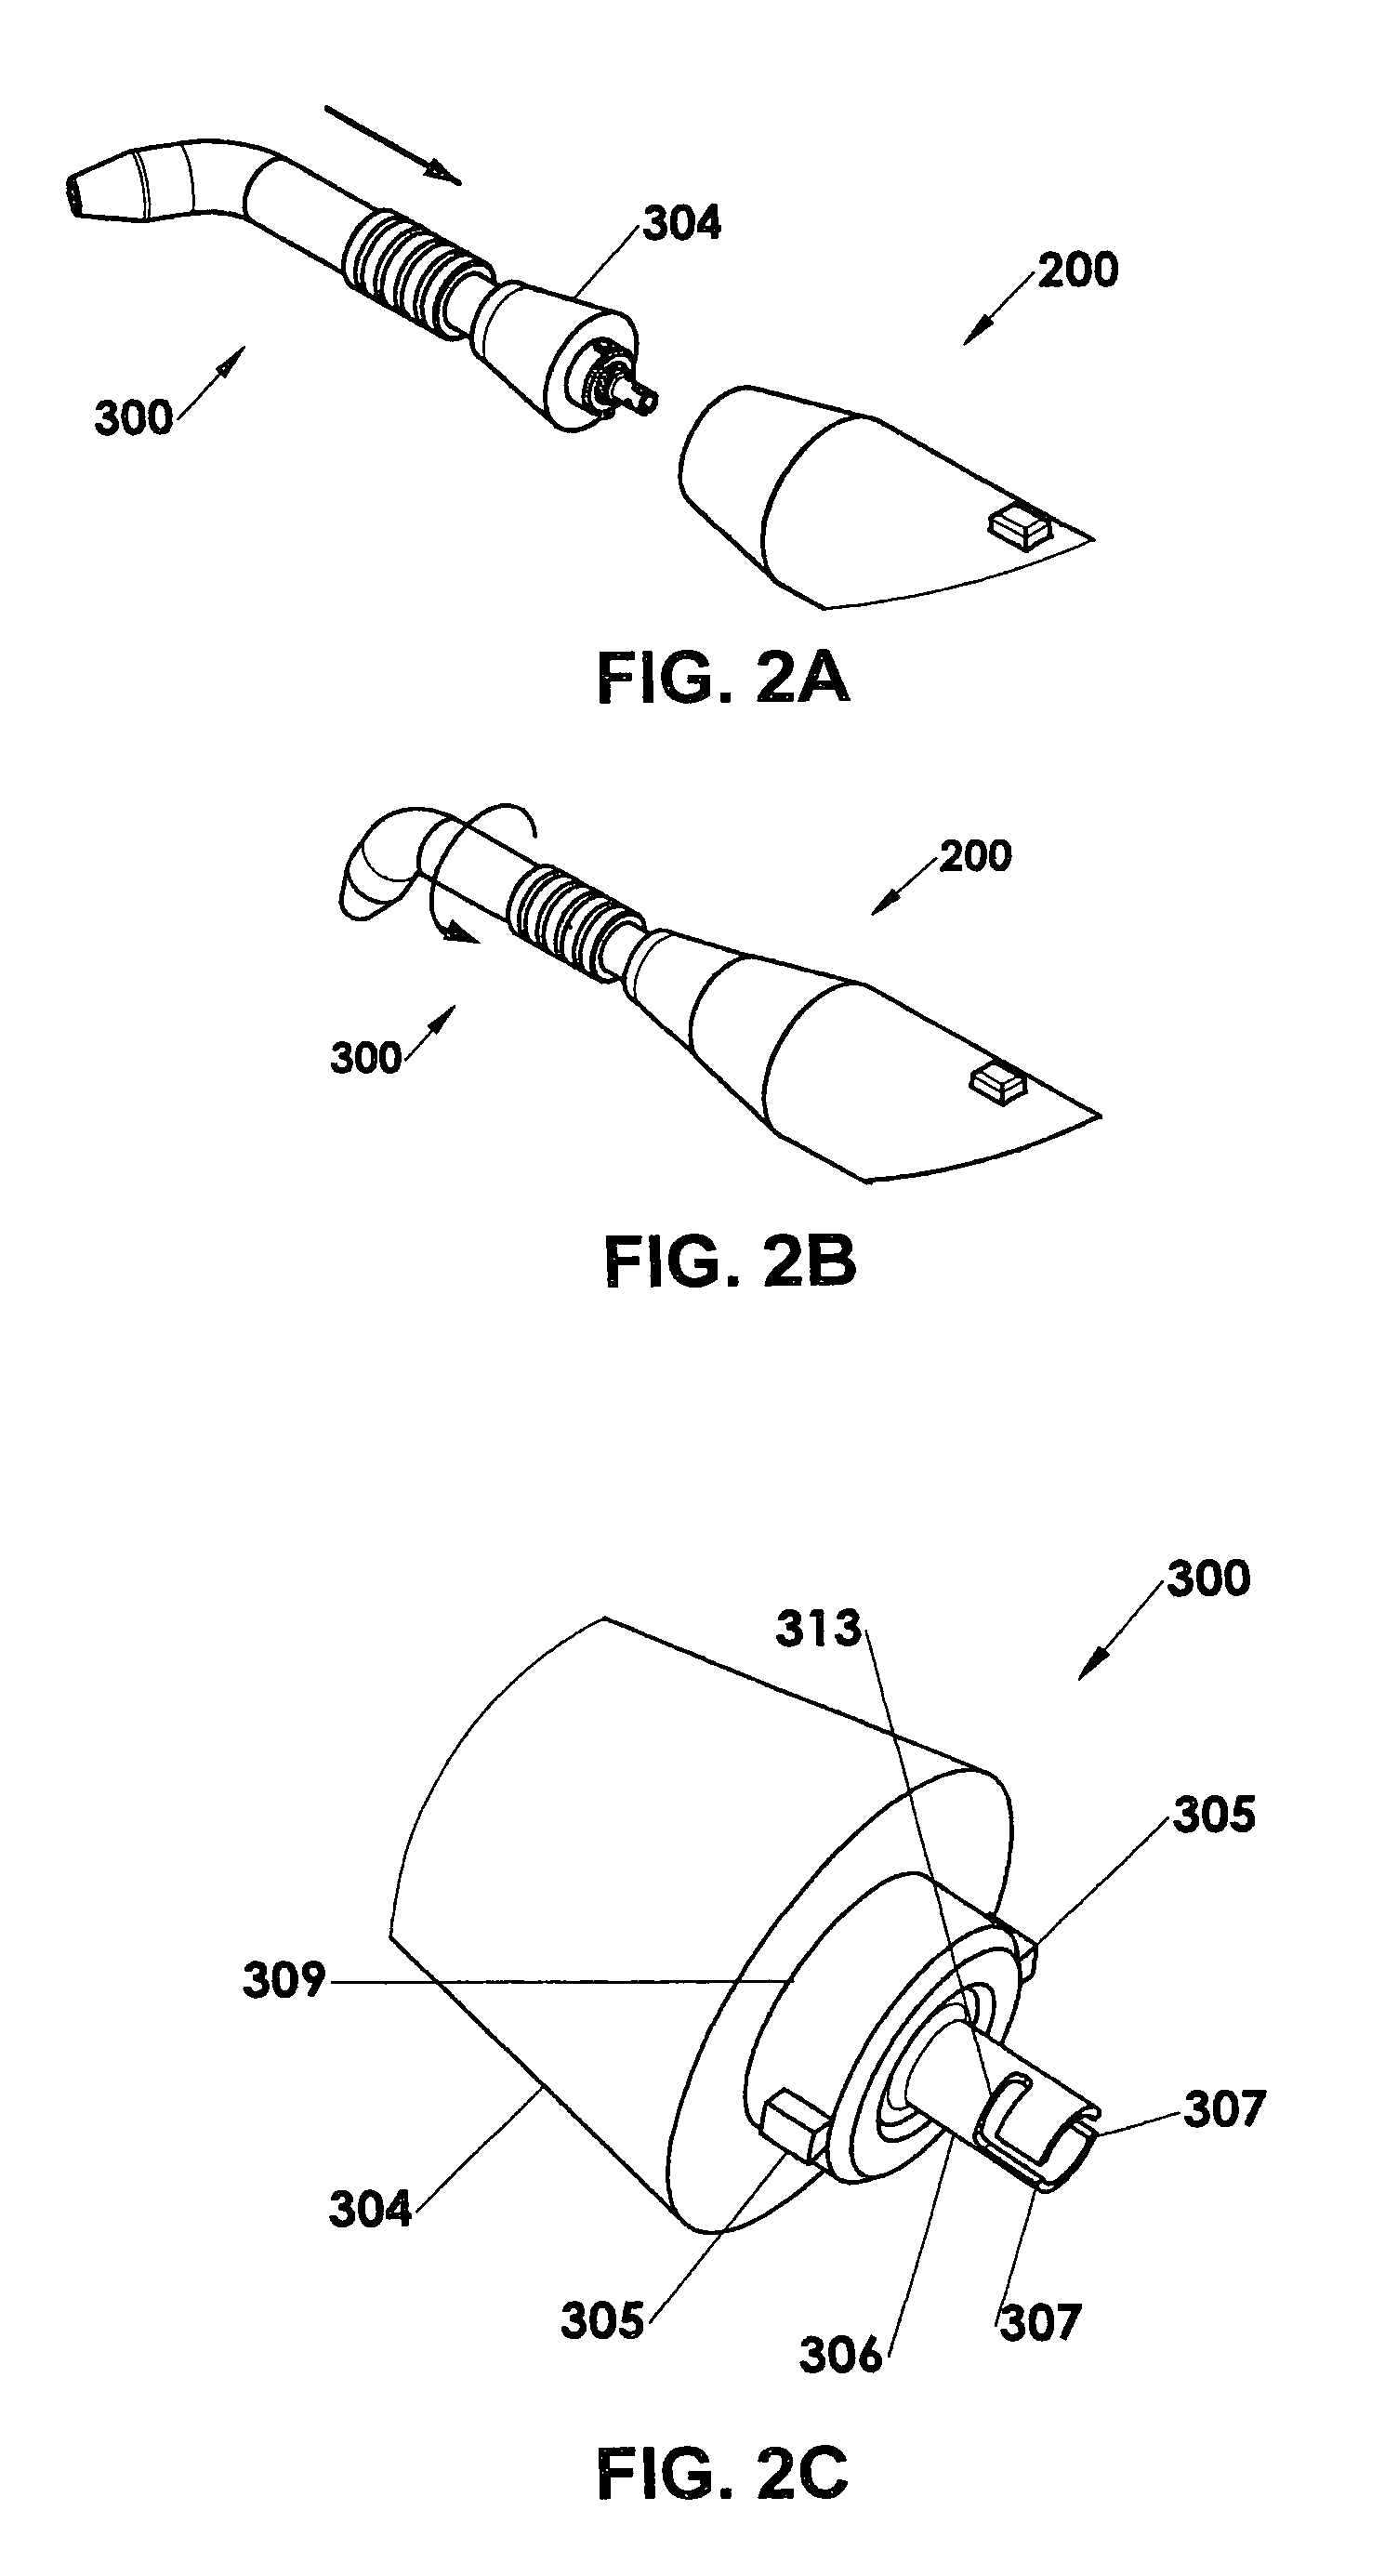 Two handed power driven flossing apparatus with removable head for attachment to power driven toothbrush